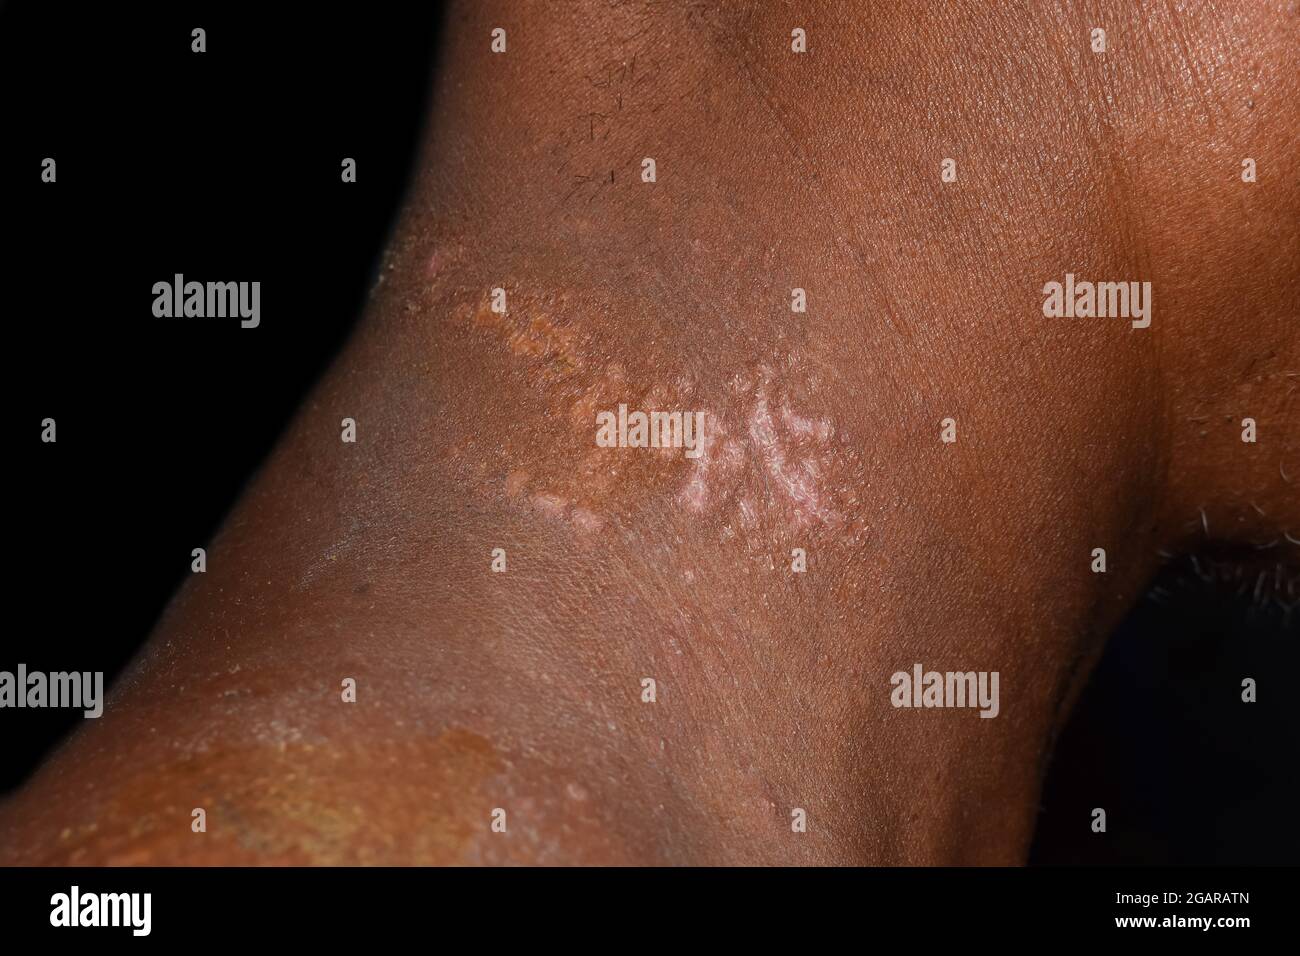 Tinea versicolor or pityriasis alba in neck of Southeast Asian man. Isolated on black. Stock Photo